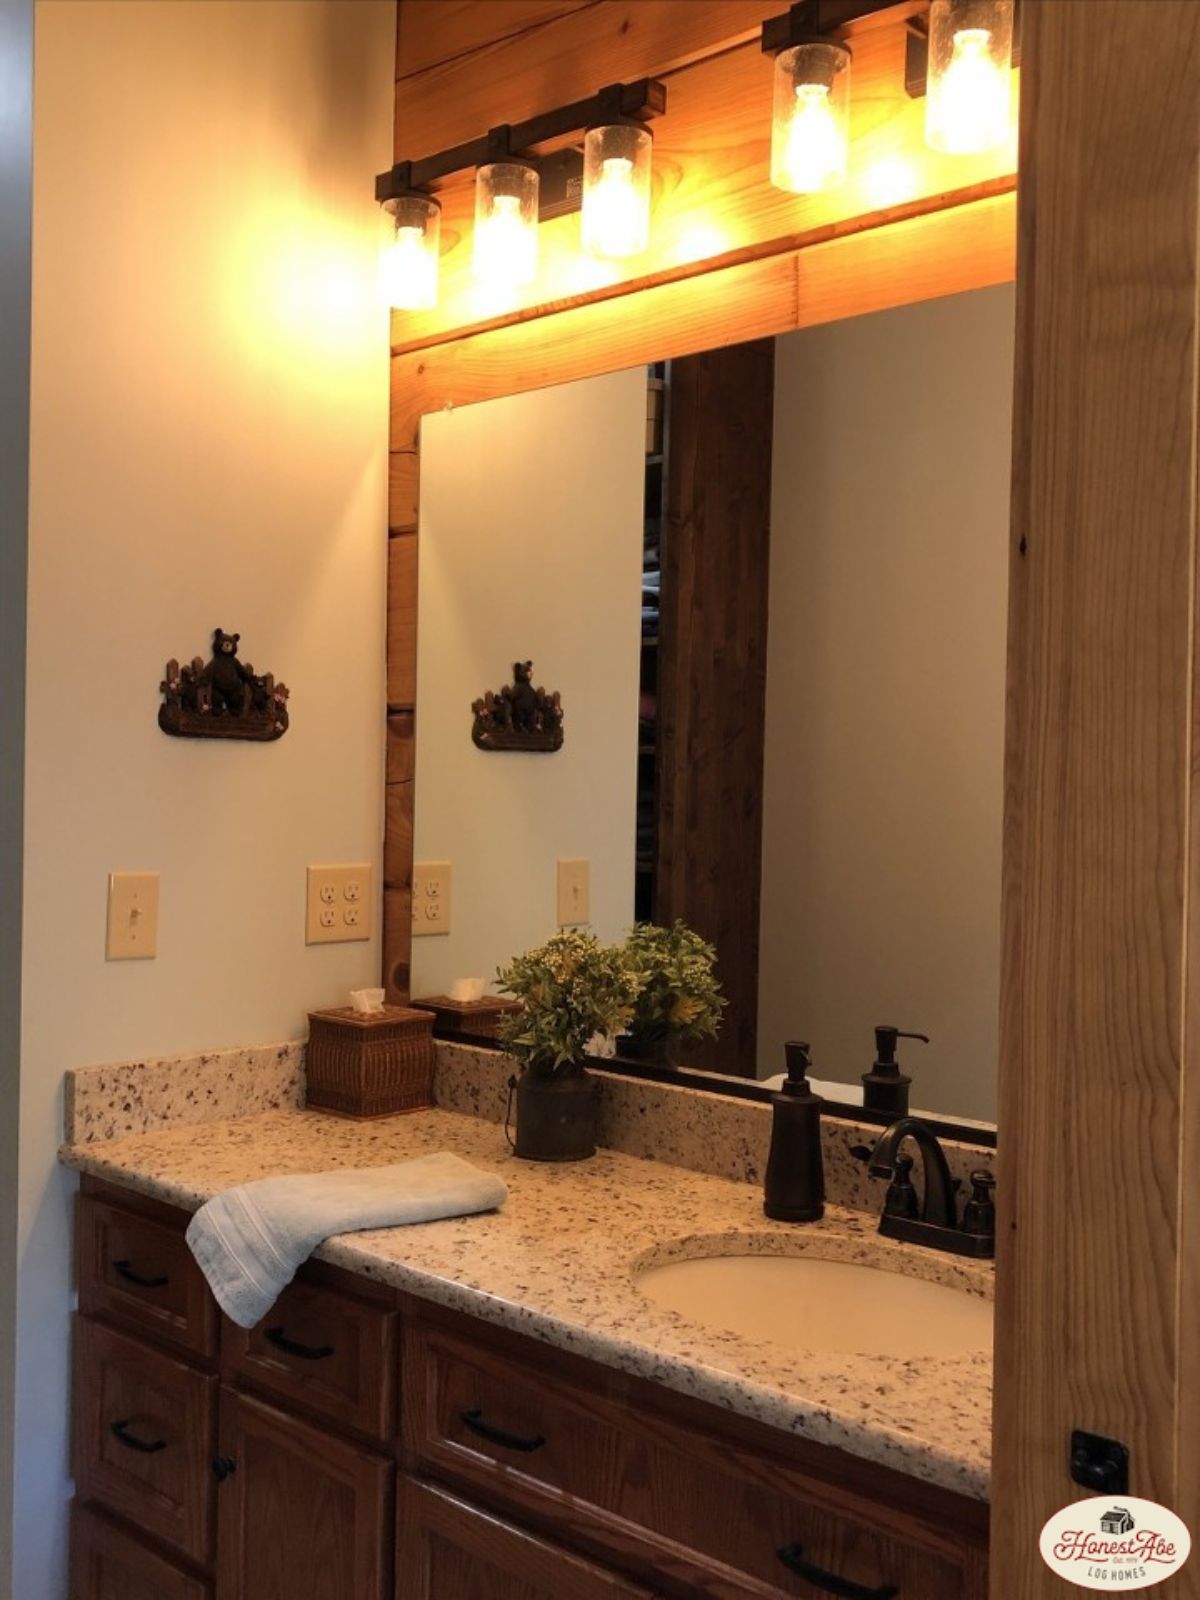 dark wood cabinets with light granite counter with mirror above counter